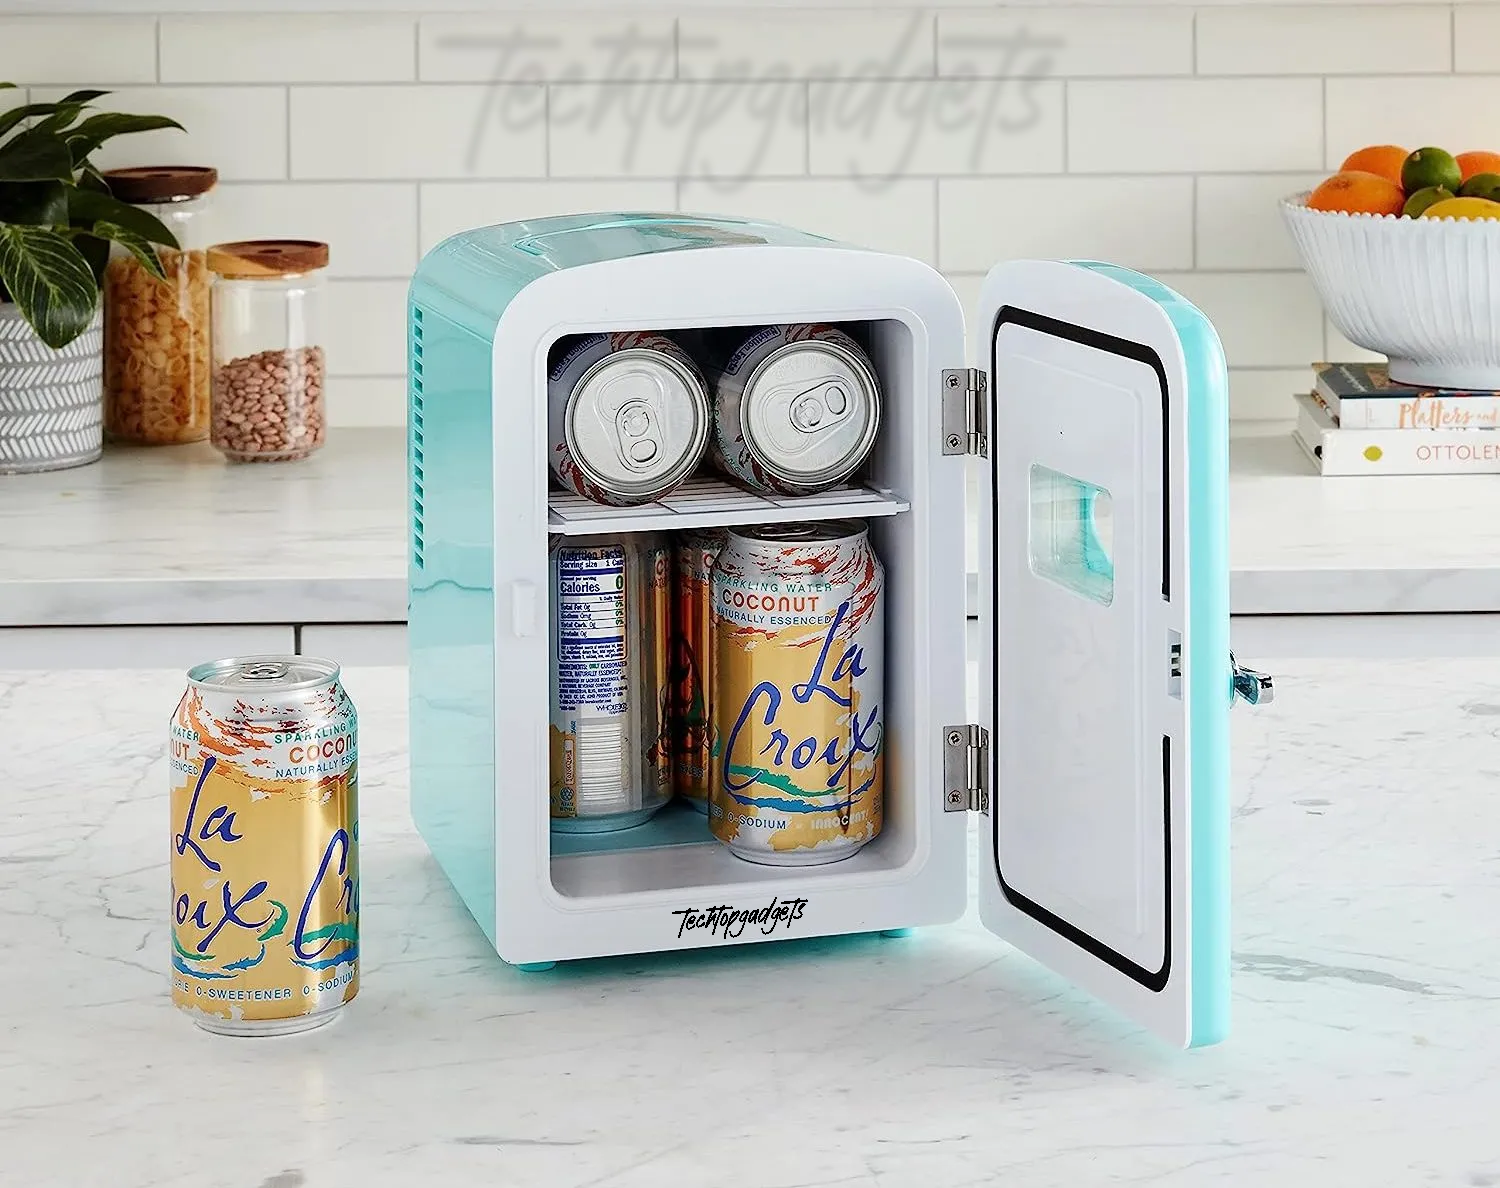 A charming, pastel blue mini fridge, door ajar, displaying an array of LaCroix cans, offers the best freezerless experience for keeping drinks chilled on a kitchen countertop.